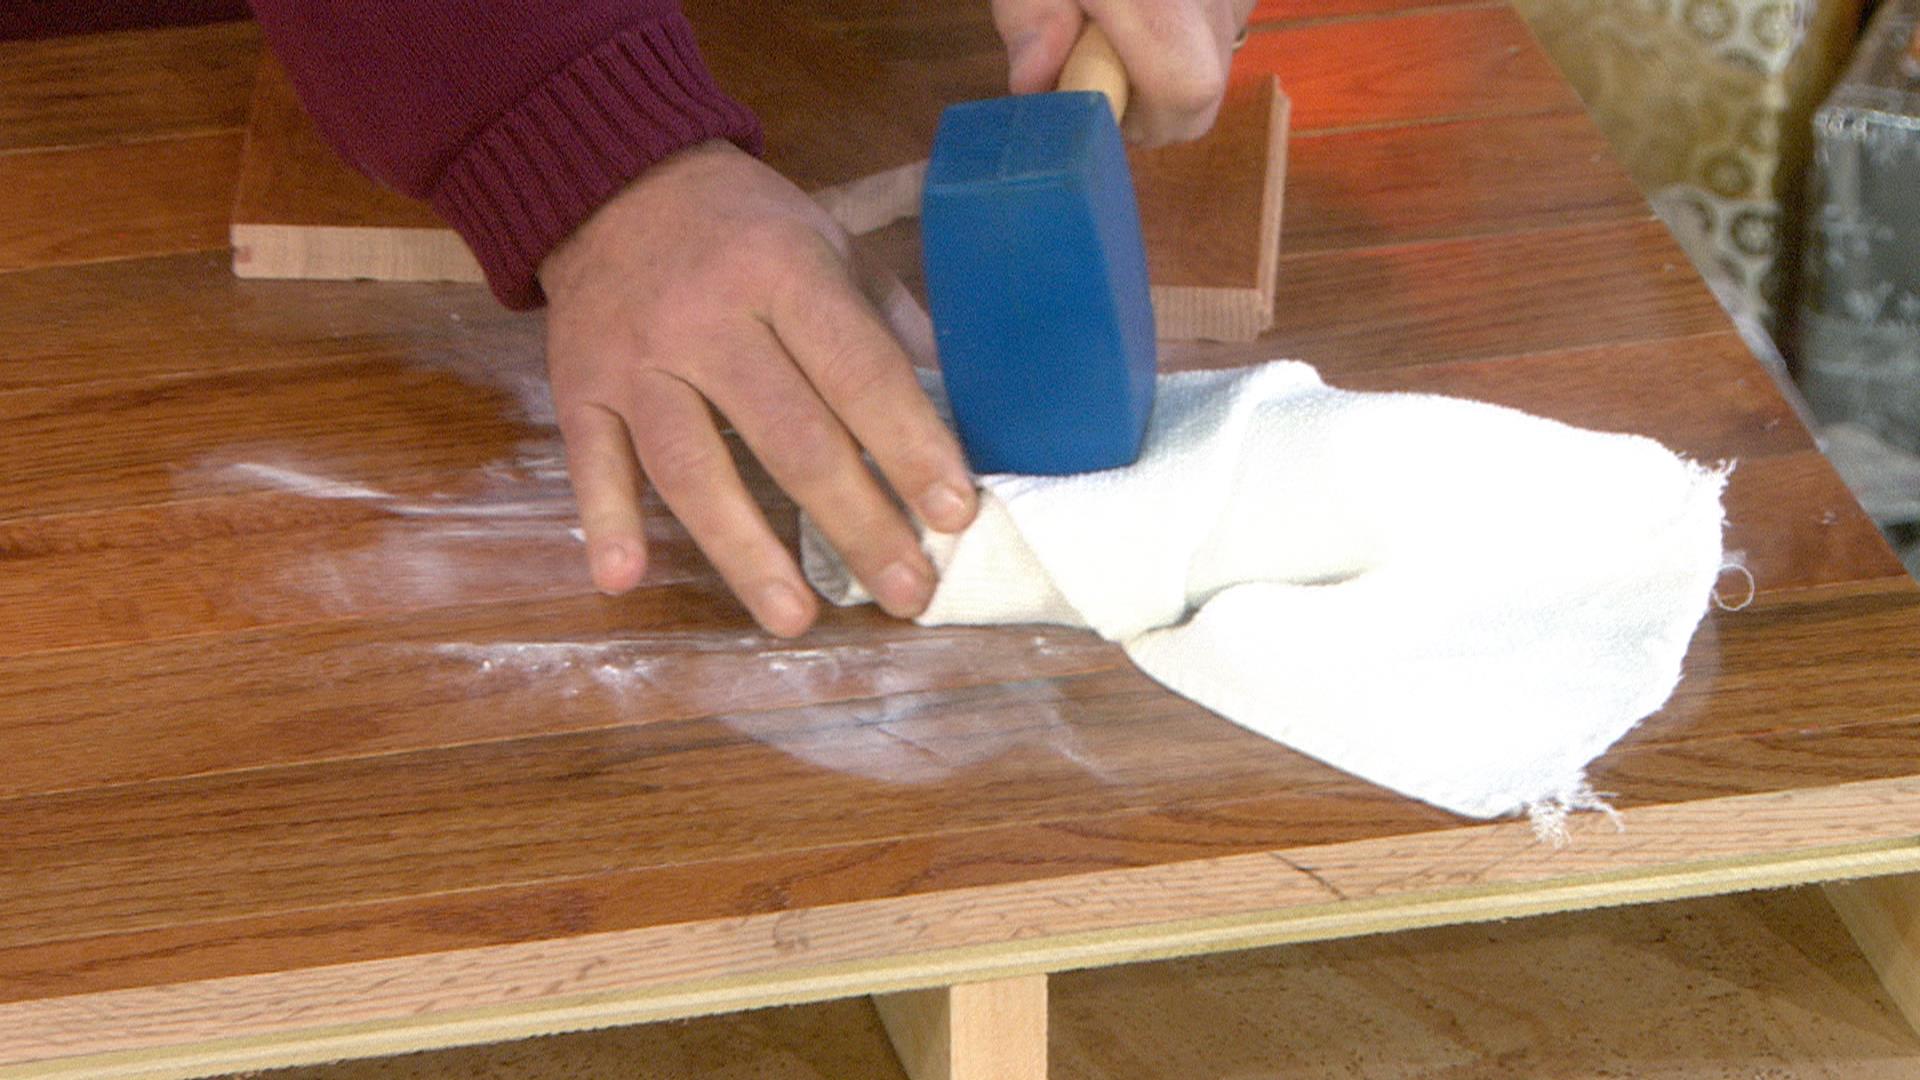 Solution for a squeaky wood floor: Would you believe baby powder?